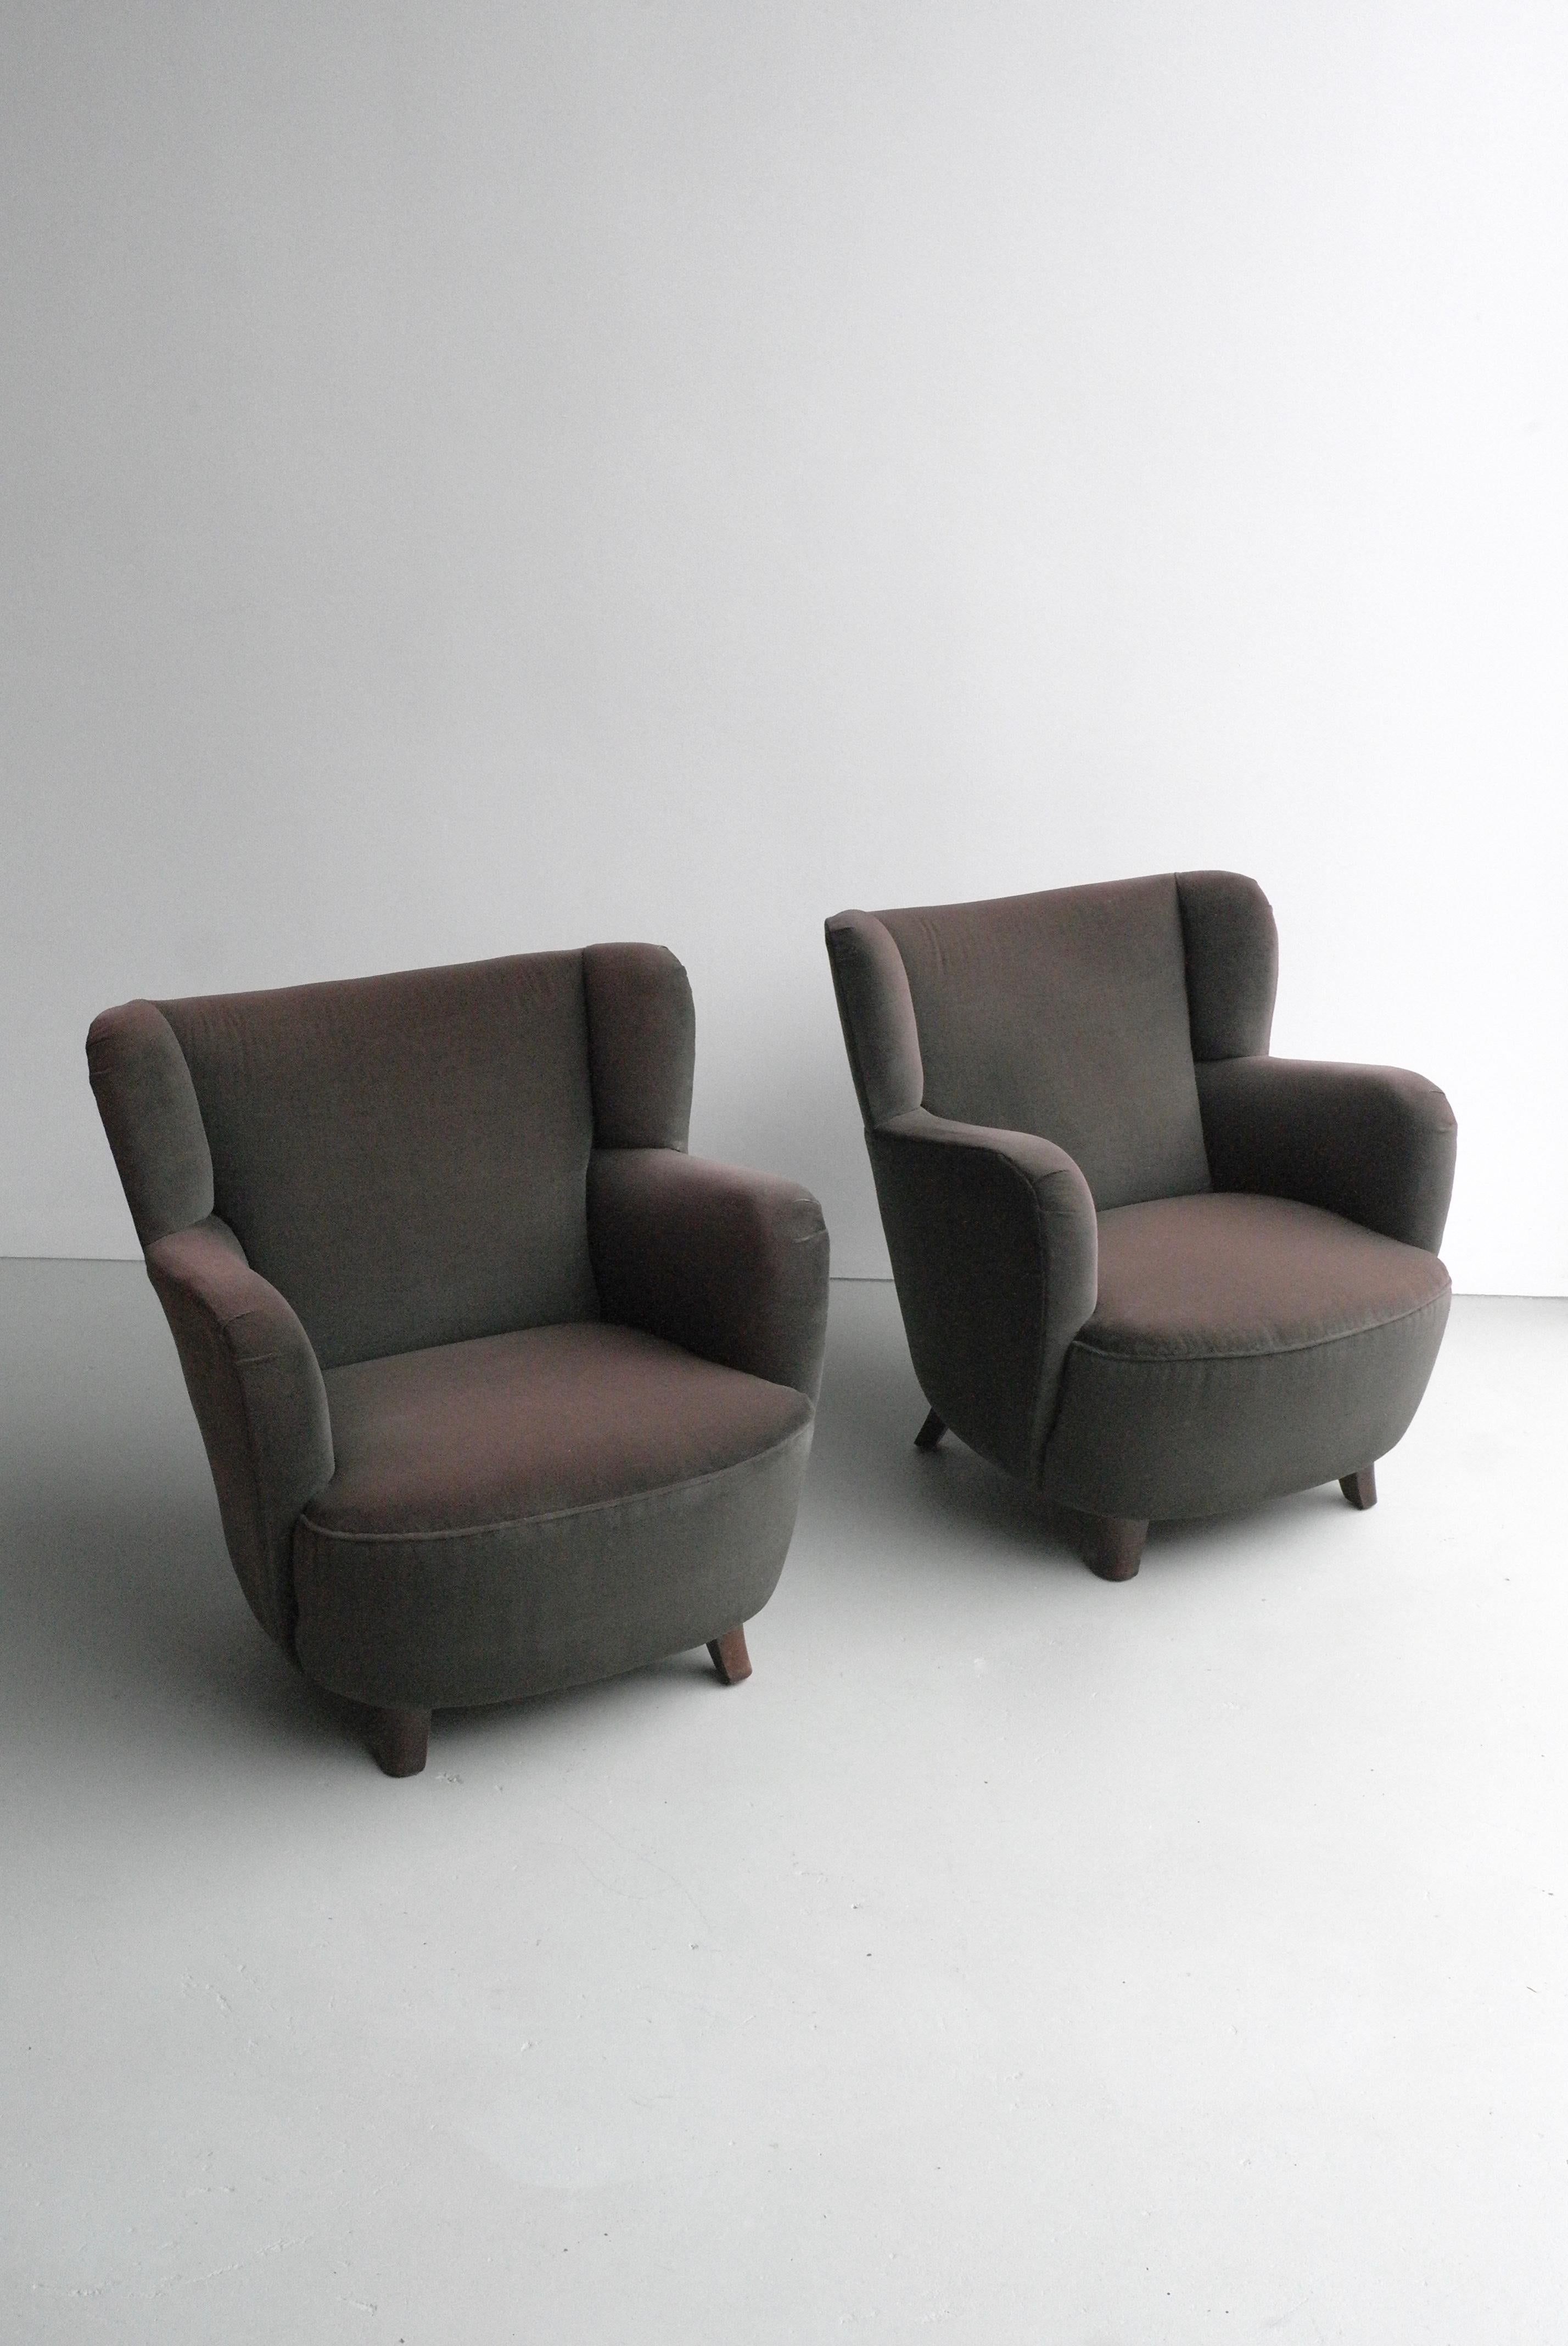 Pair of mid-century Danish club chairs in brown velvet with eggplant glow.